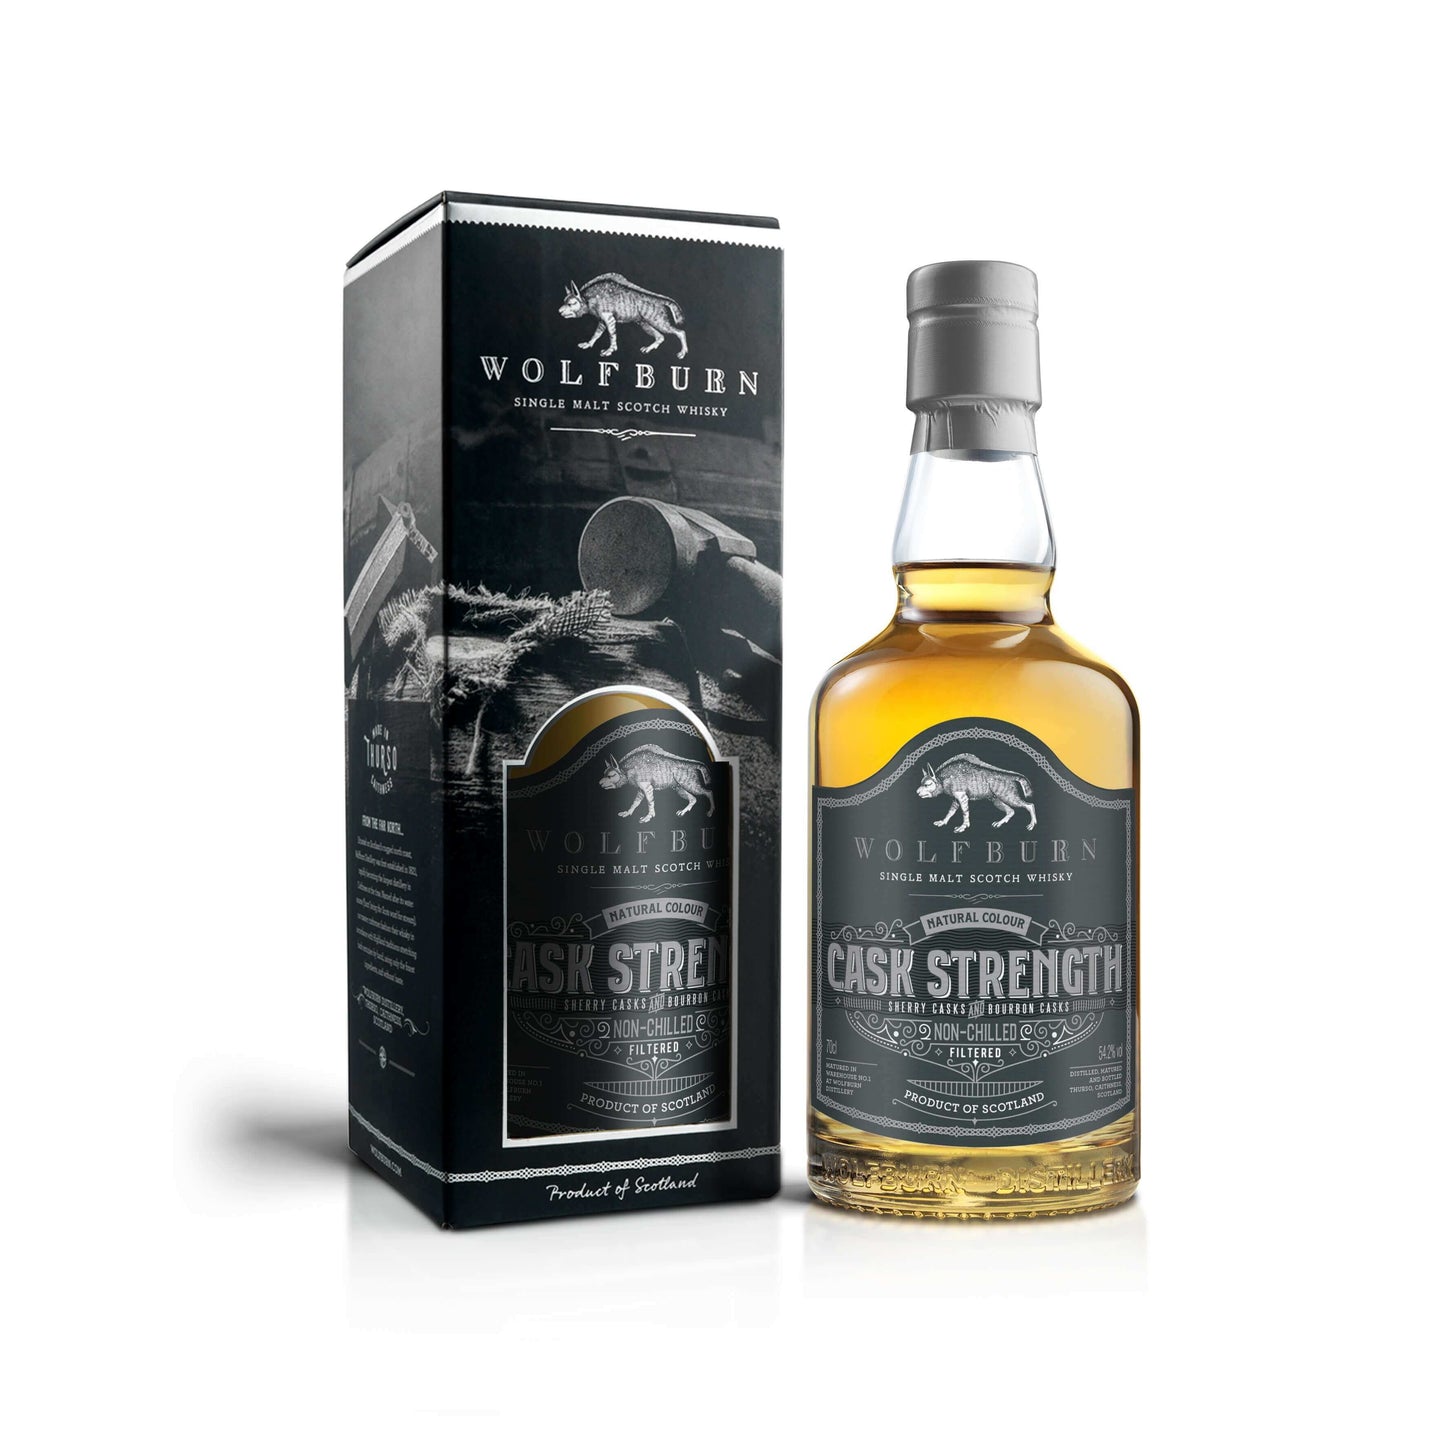 Wolfburn Distillery Wolfburn Cask Strength - 56.9% vol. 70cl Crafted from spirit matured in a combination of wonderfully sweet Oloroso sherry butts and ex-bourbon quarter casks it is a shade over seven years old. This hand-selected cask pairing has done a